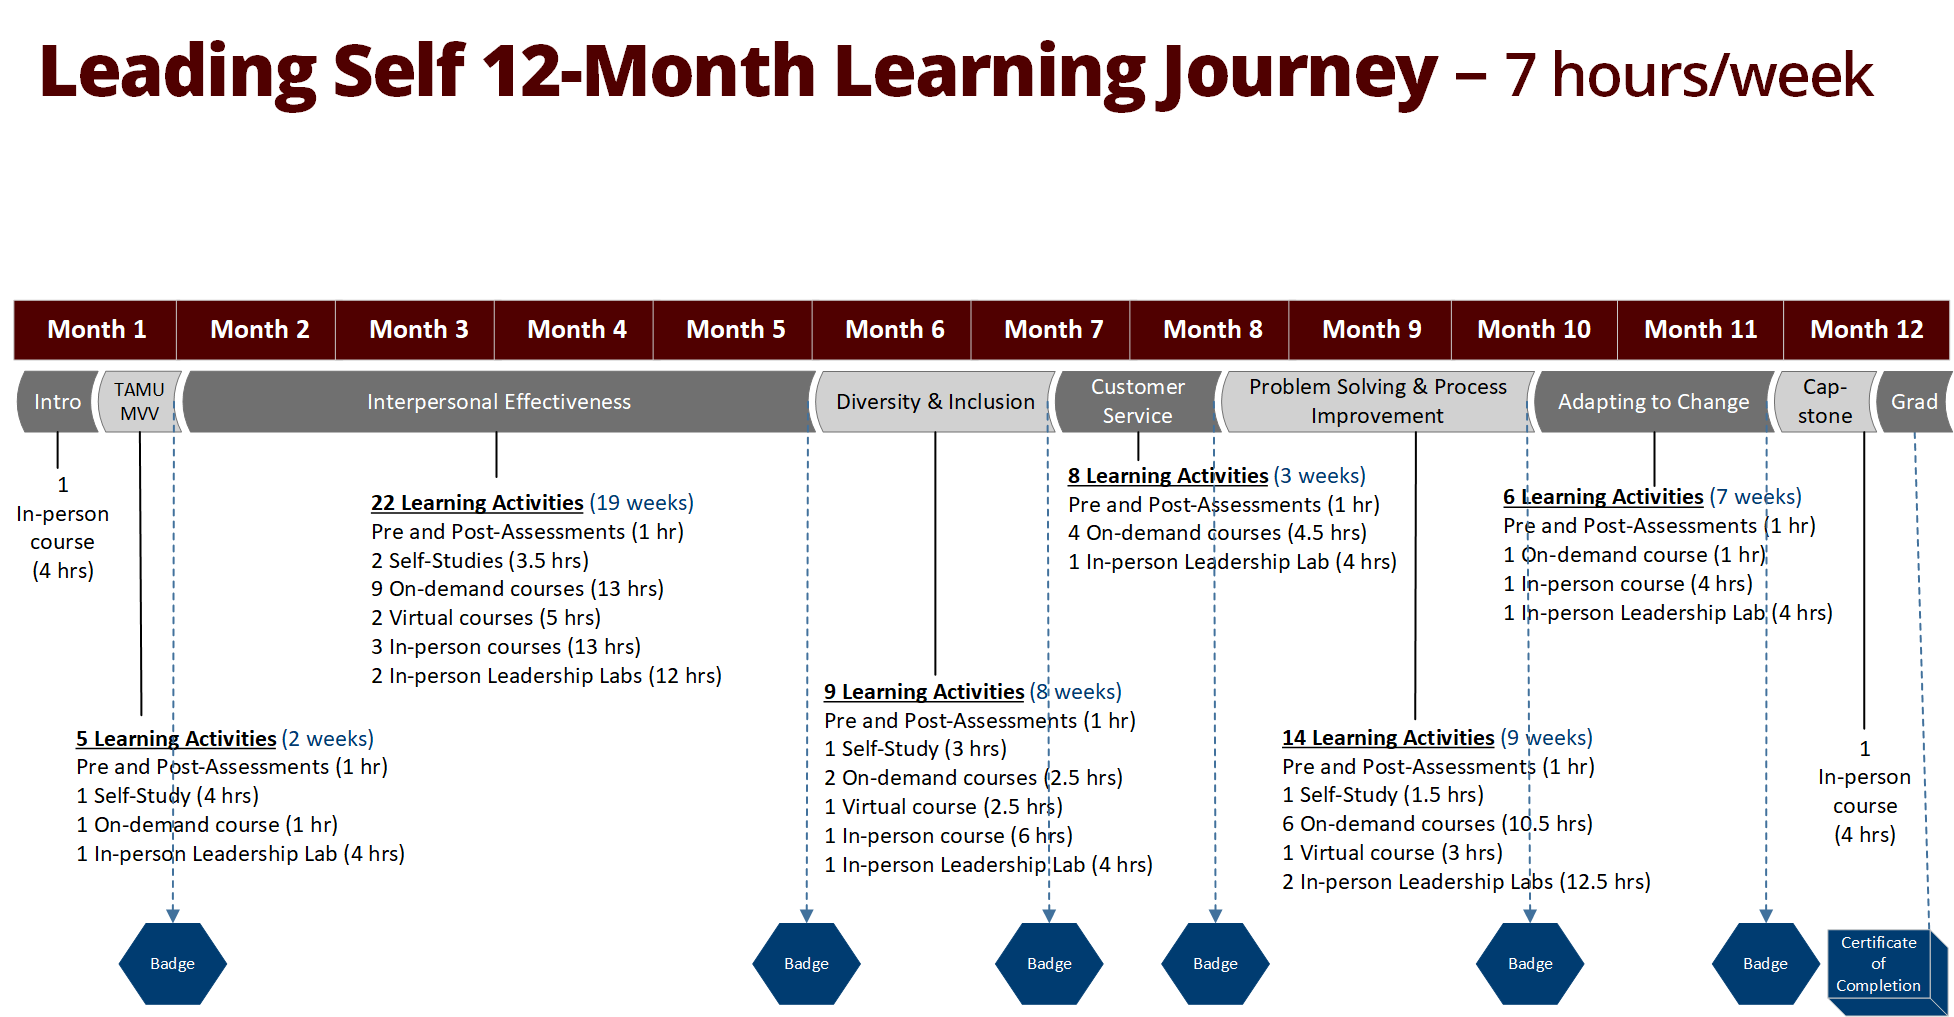 Shows the recommended distribution of learning activities over 12 months